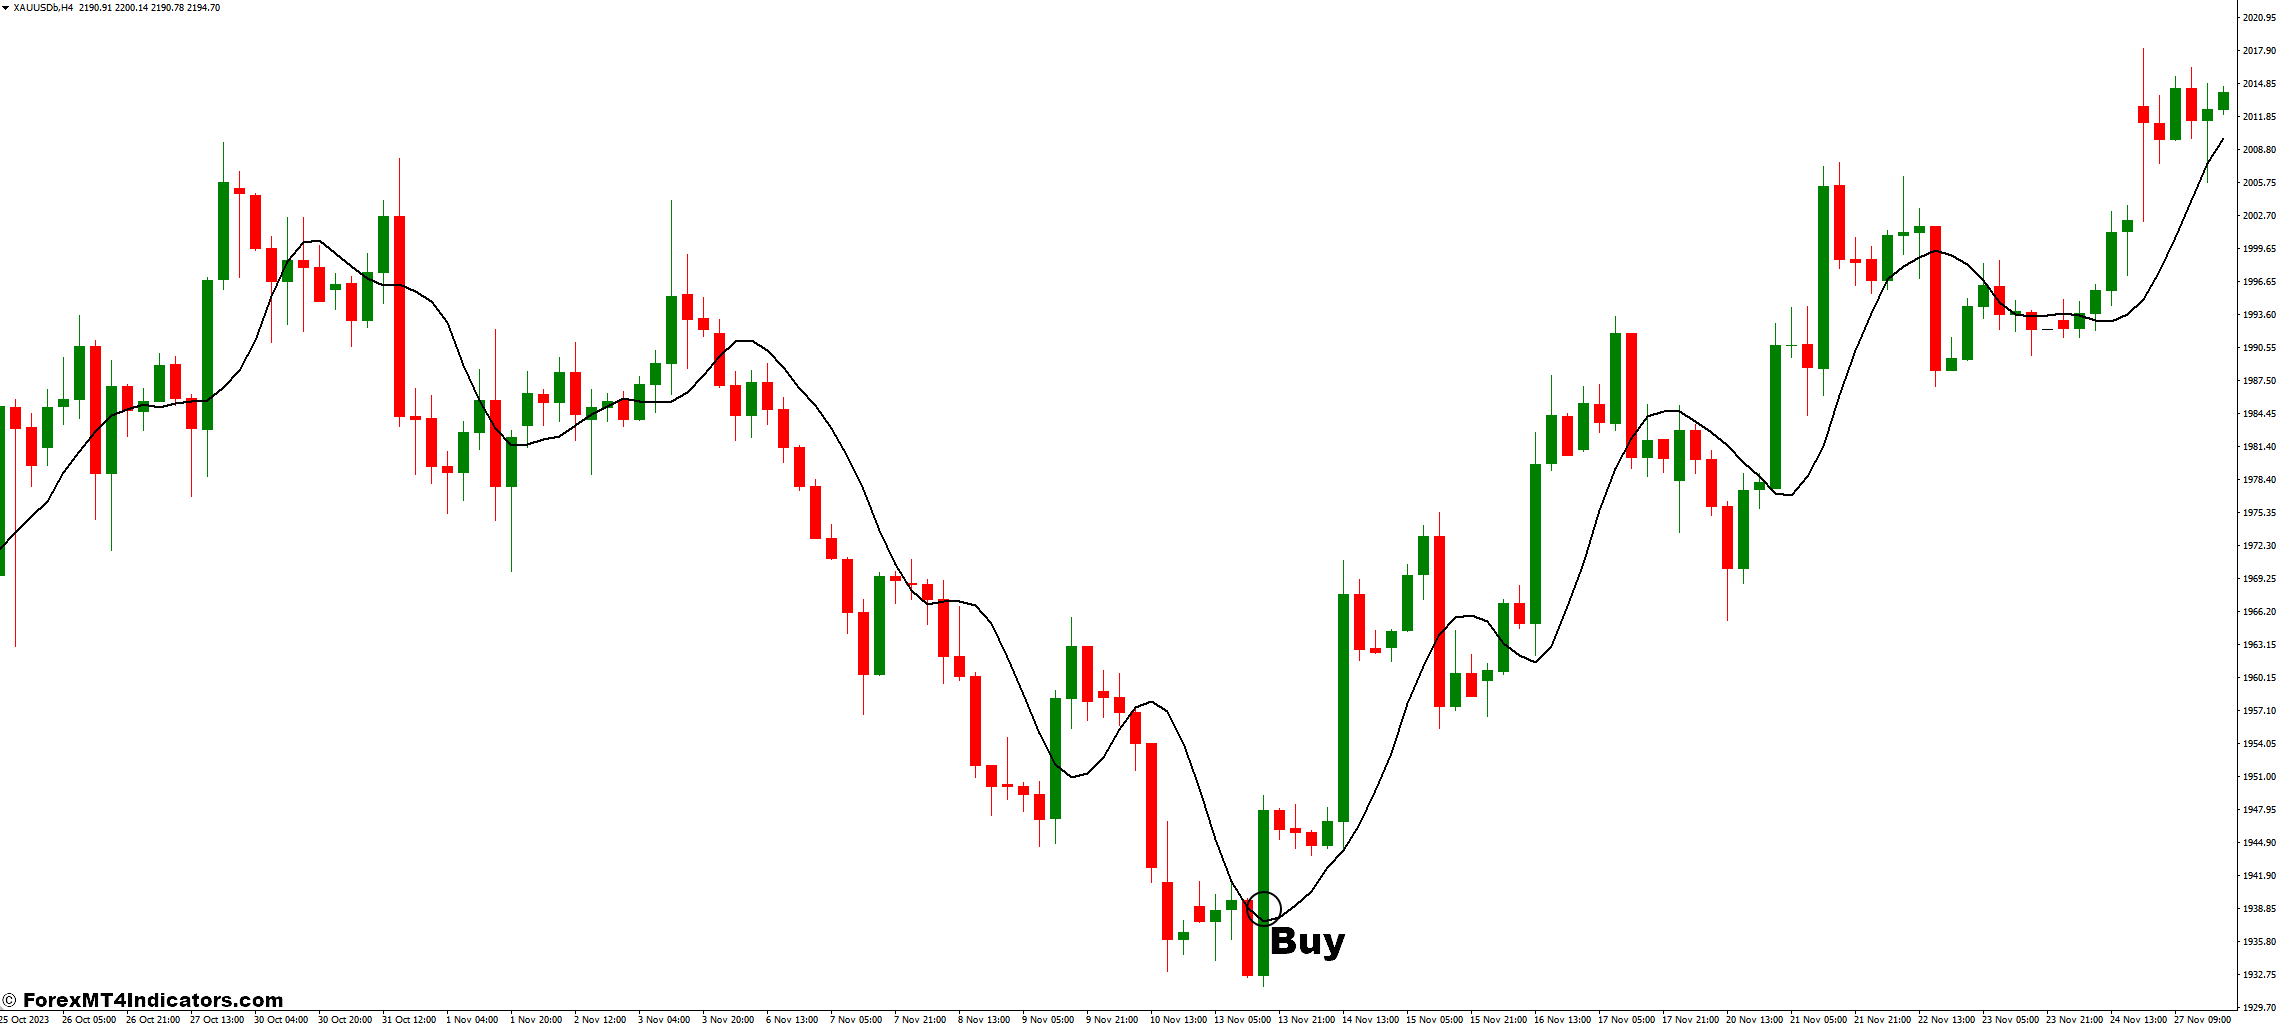 How to Trade with TMA MT4 Indicator - Buy Entry